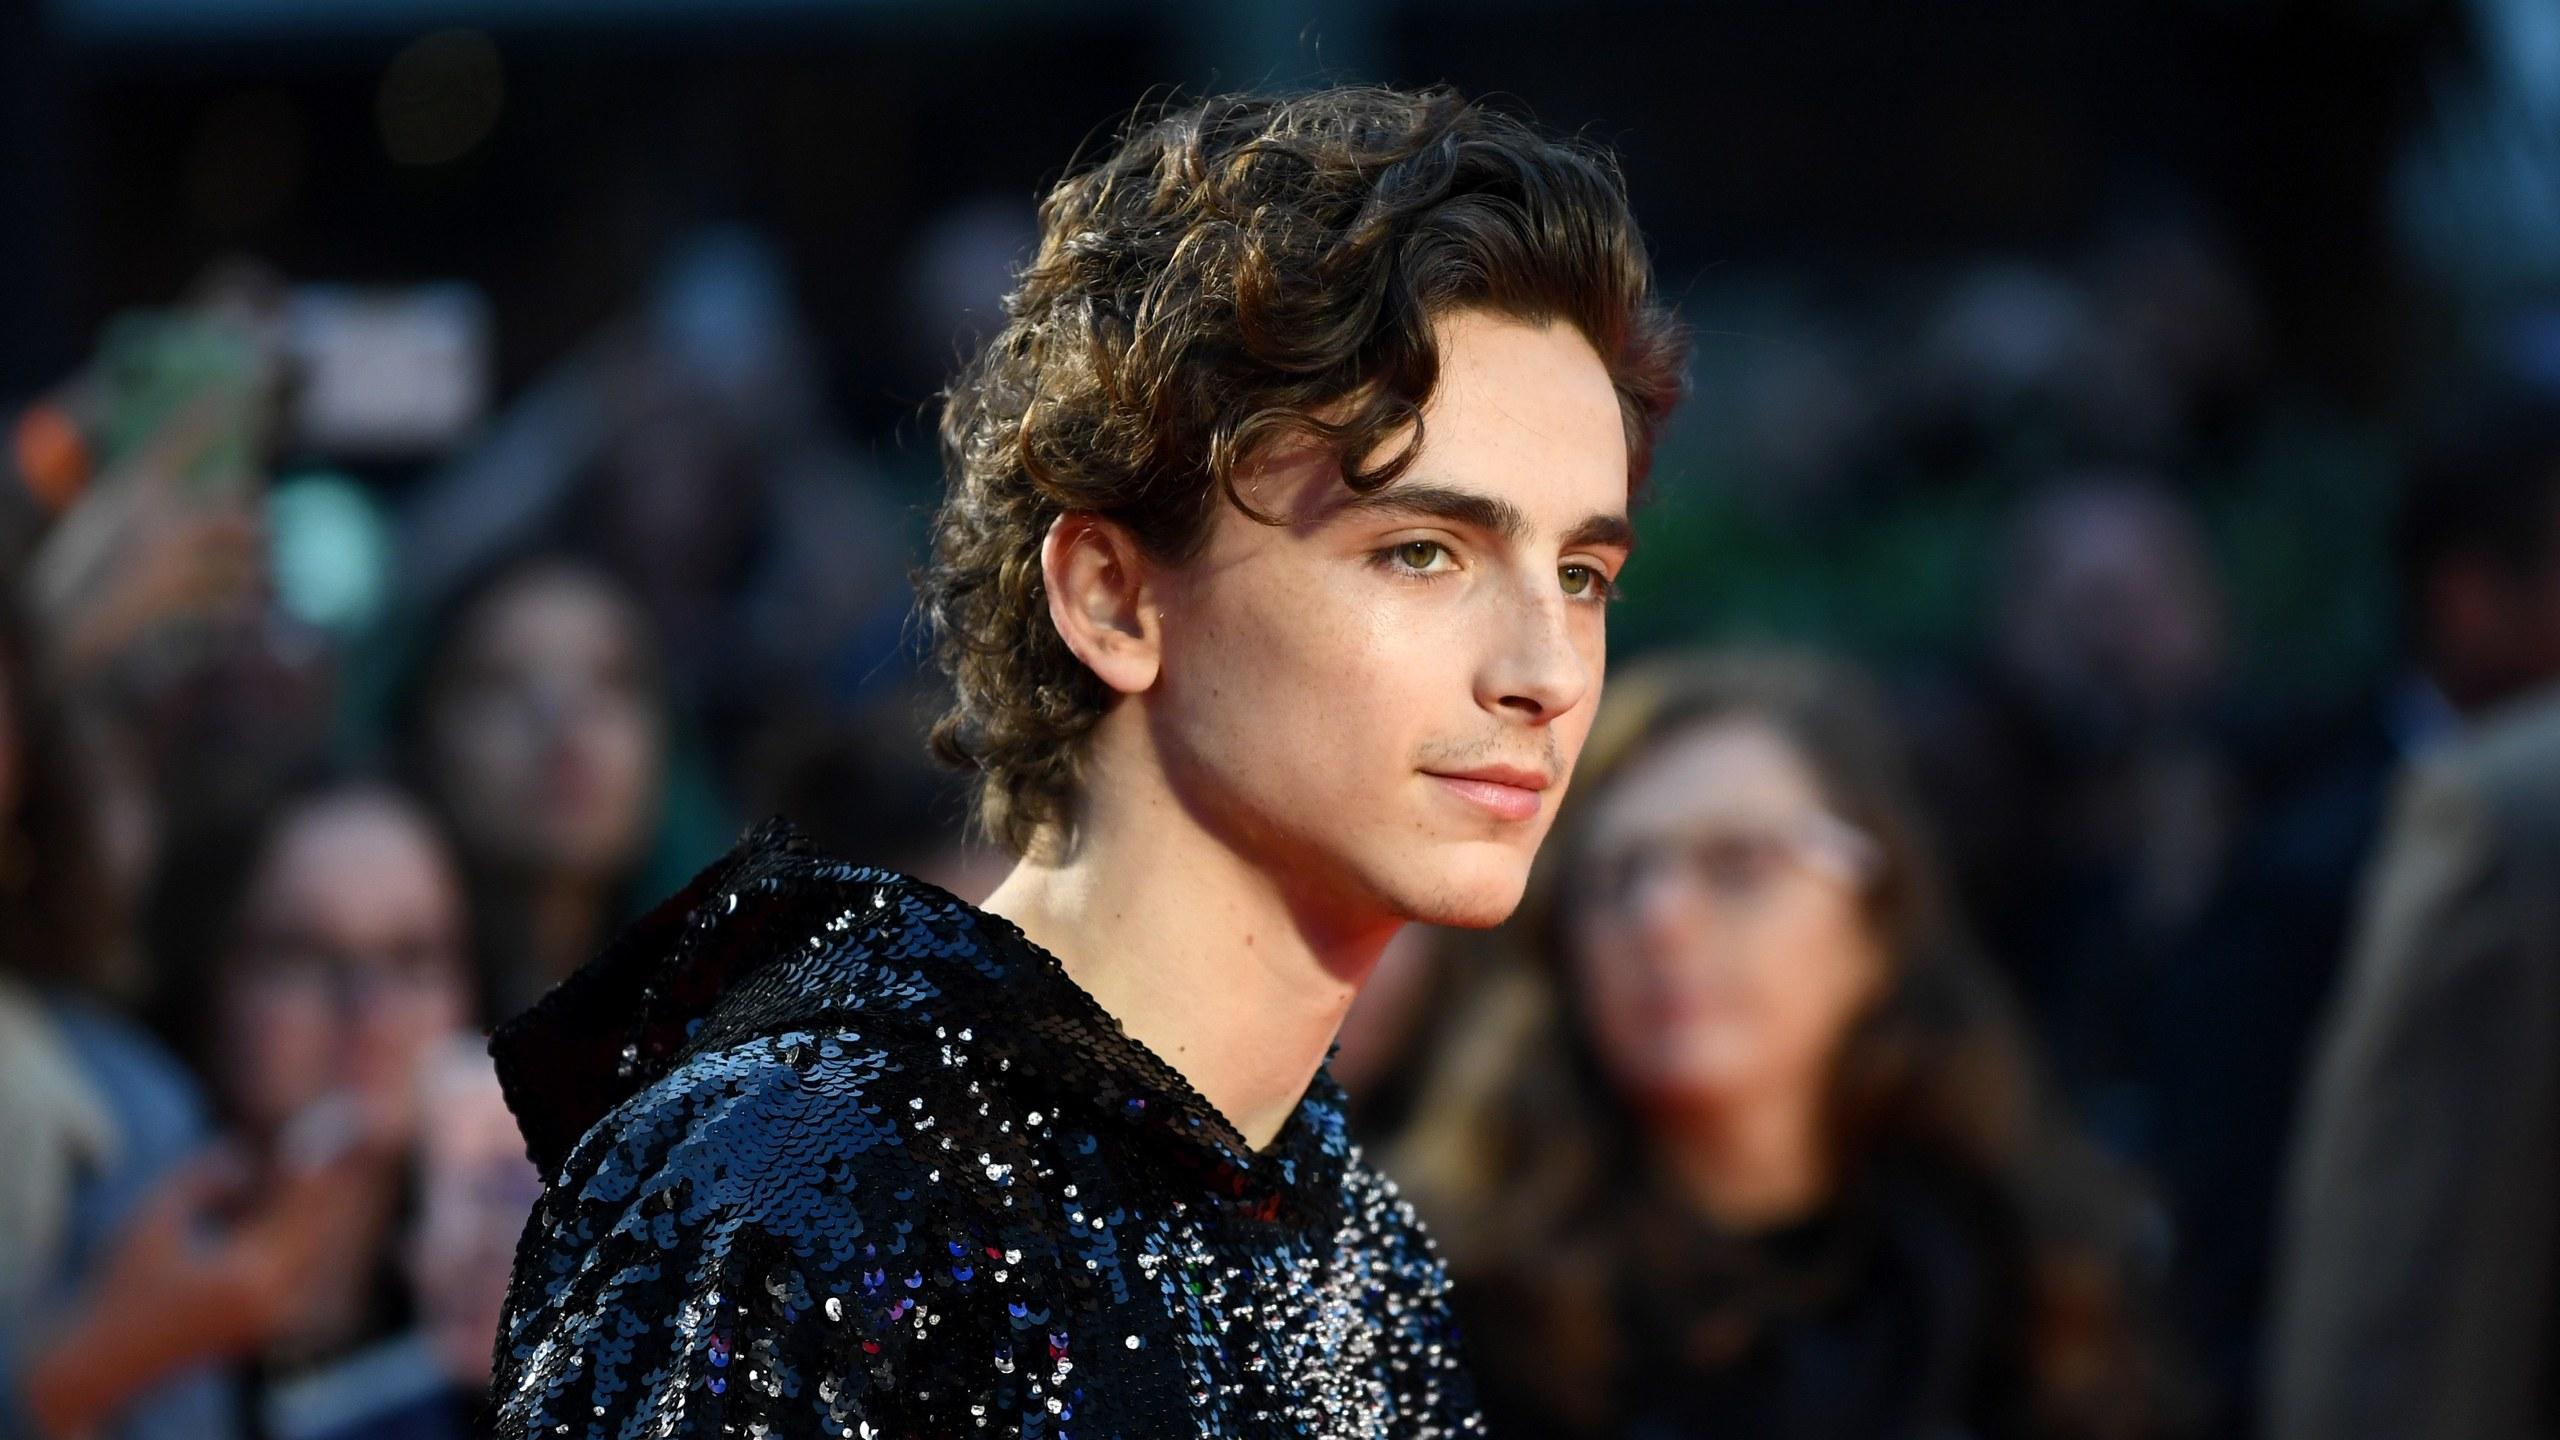 Timothée Chalamet Shakes up the Red Carpet with a High